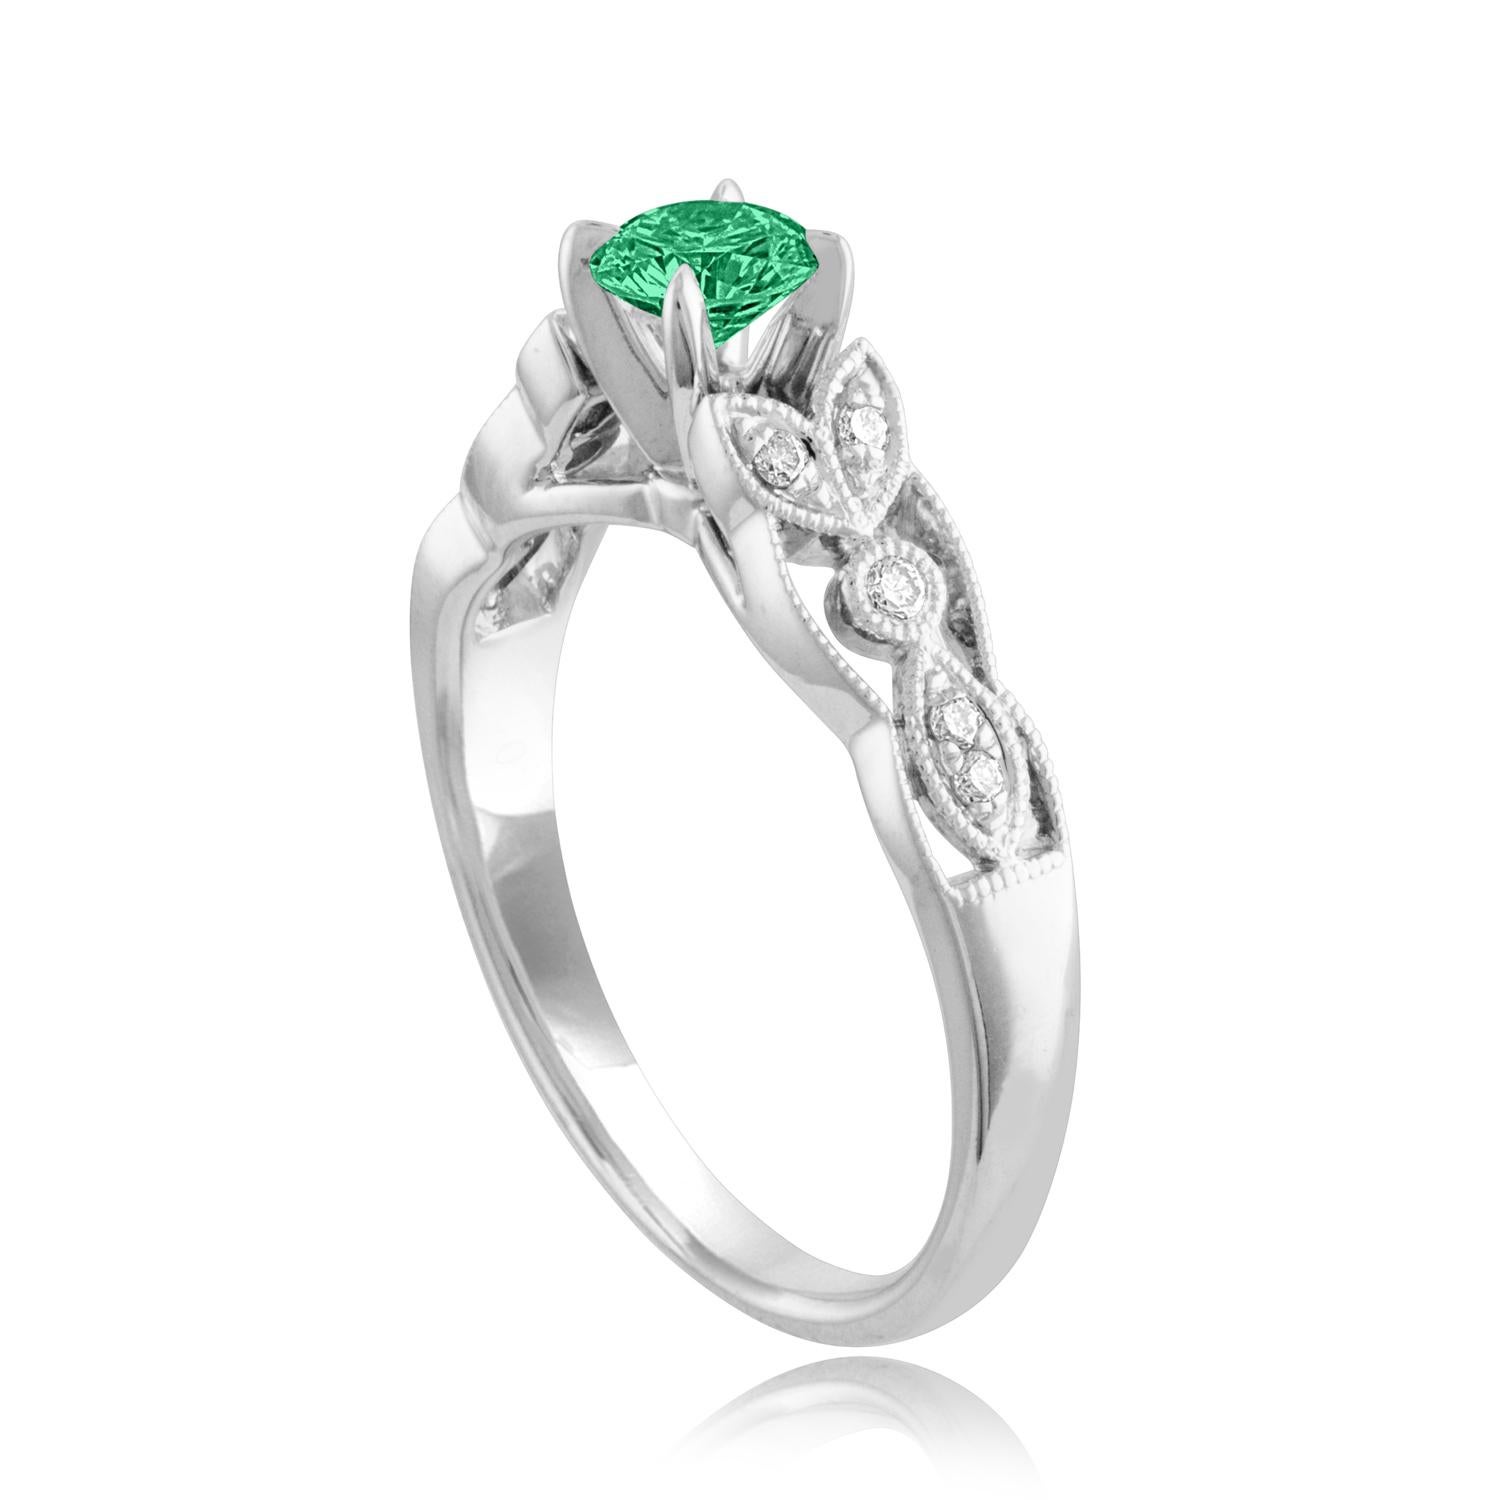 Beautiful Diamond & Emerald Milgrain Ring
The ring is 18K White Gold.
There are 0.09 Carats in Diamonds F/G VS/SI
The Center is Round 0.38 Carat Emerald.
The Emerald is AGL certified.
The ring is a size 6.75, sizable.
The ring weighs 3.8 grams.